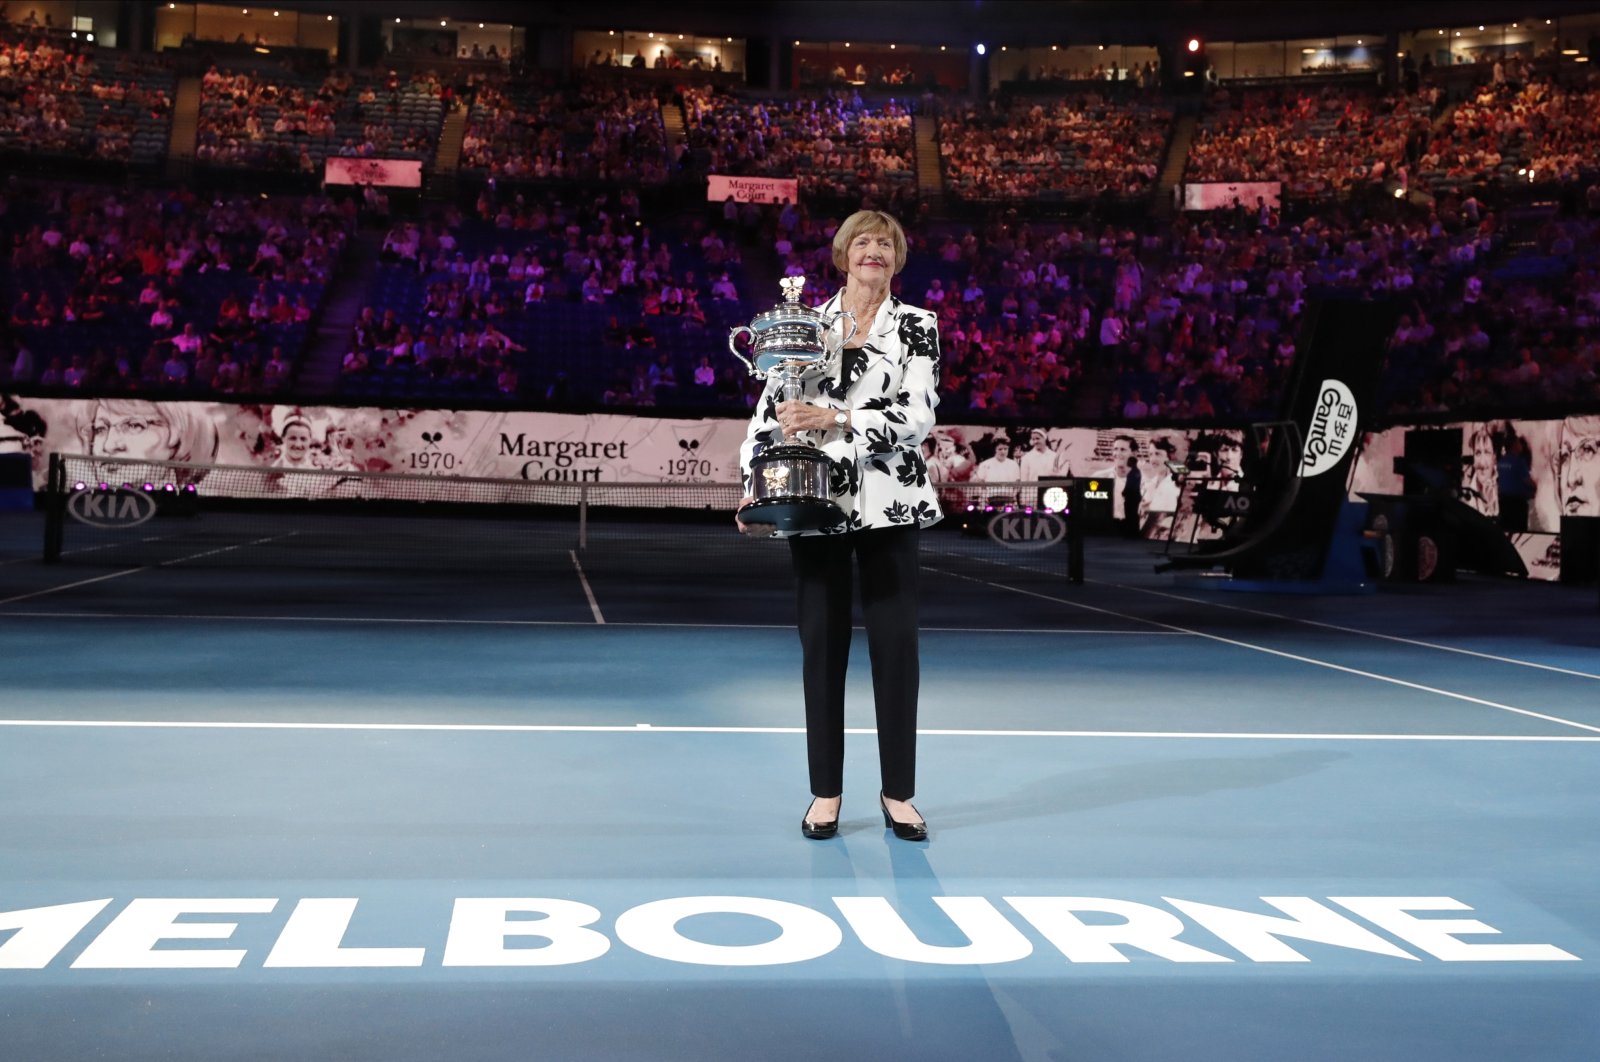  Margaret Court holds up the women's Australian Open trophy as her 50th anniversary of her Grand Slam is celebrated at the Australian Open tennis championship in Melbourne, Australia, Jan. 27, 2020. (AP Photo)